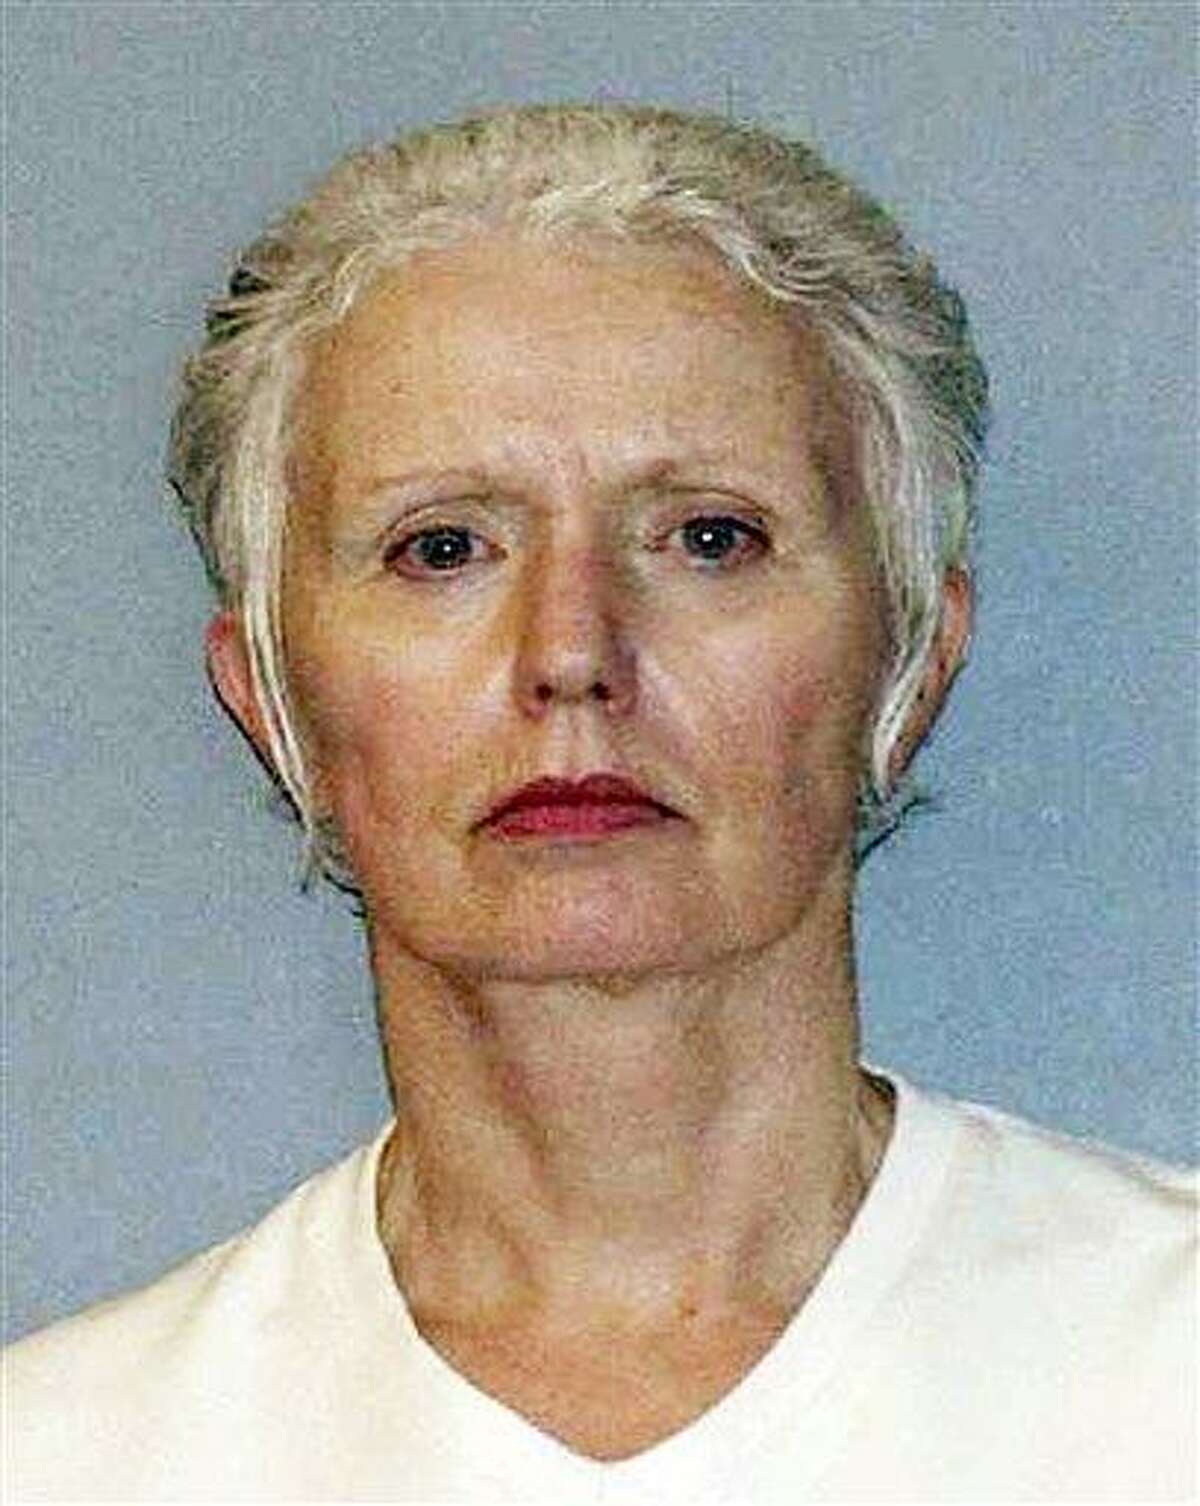 This undated file photo, provided by the U.S. Marshals Service, shows Catherine Greig, the longtime girlfriend of Whitey Bulger. Associated Press